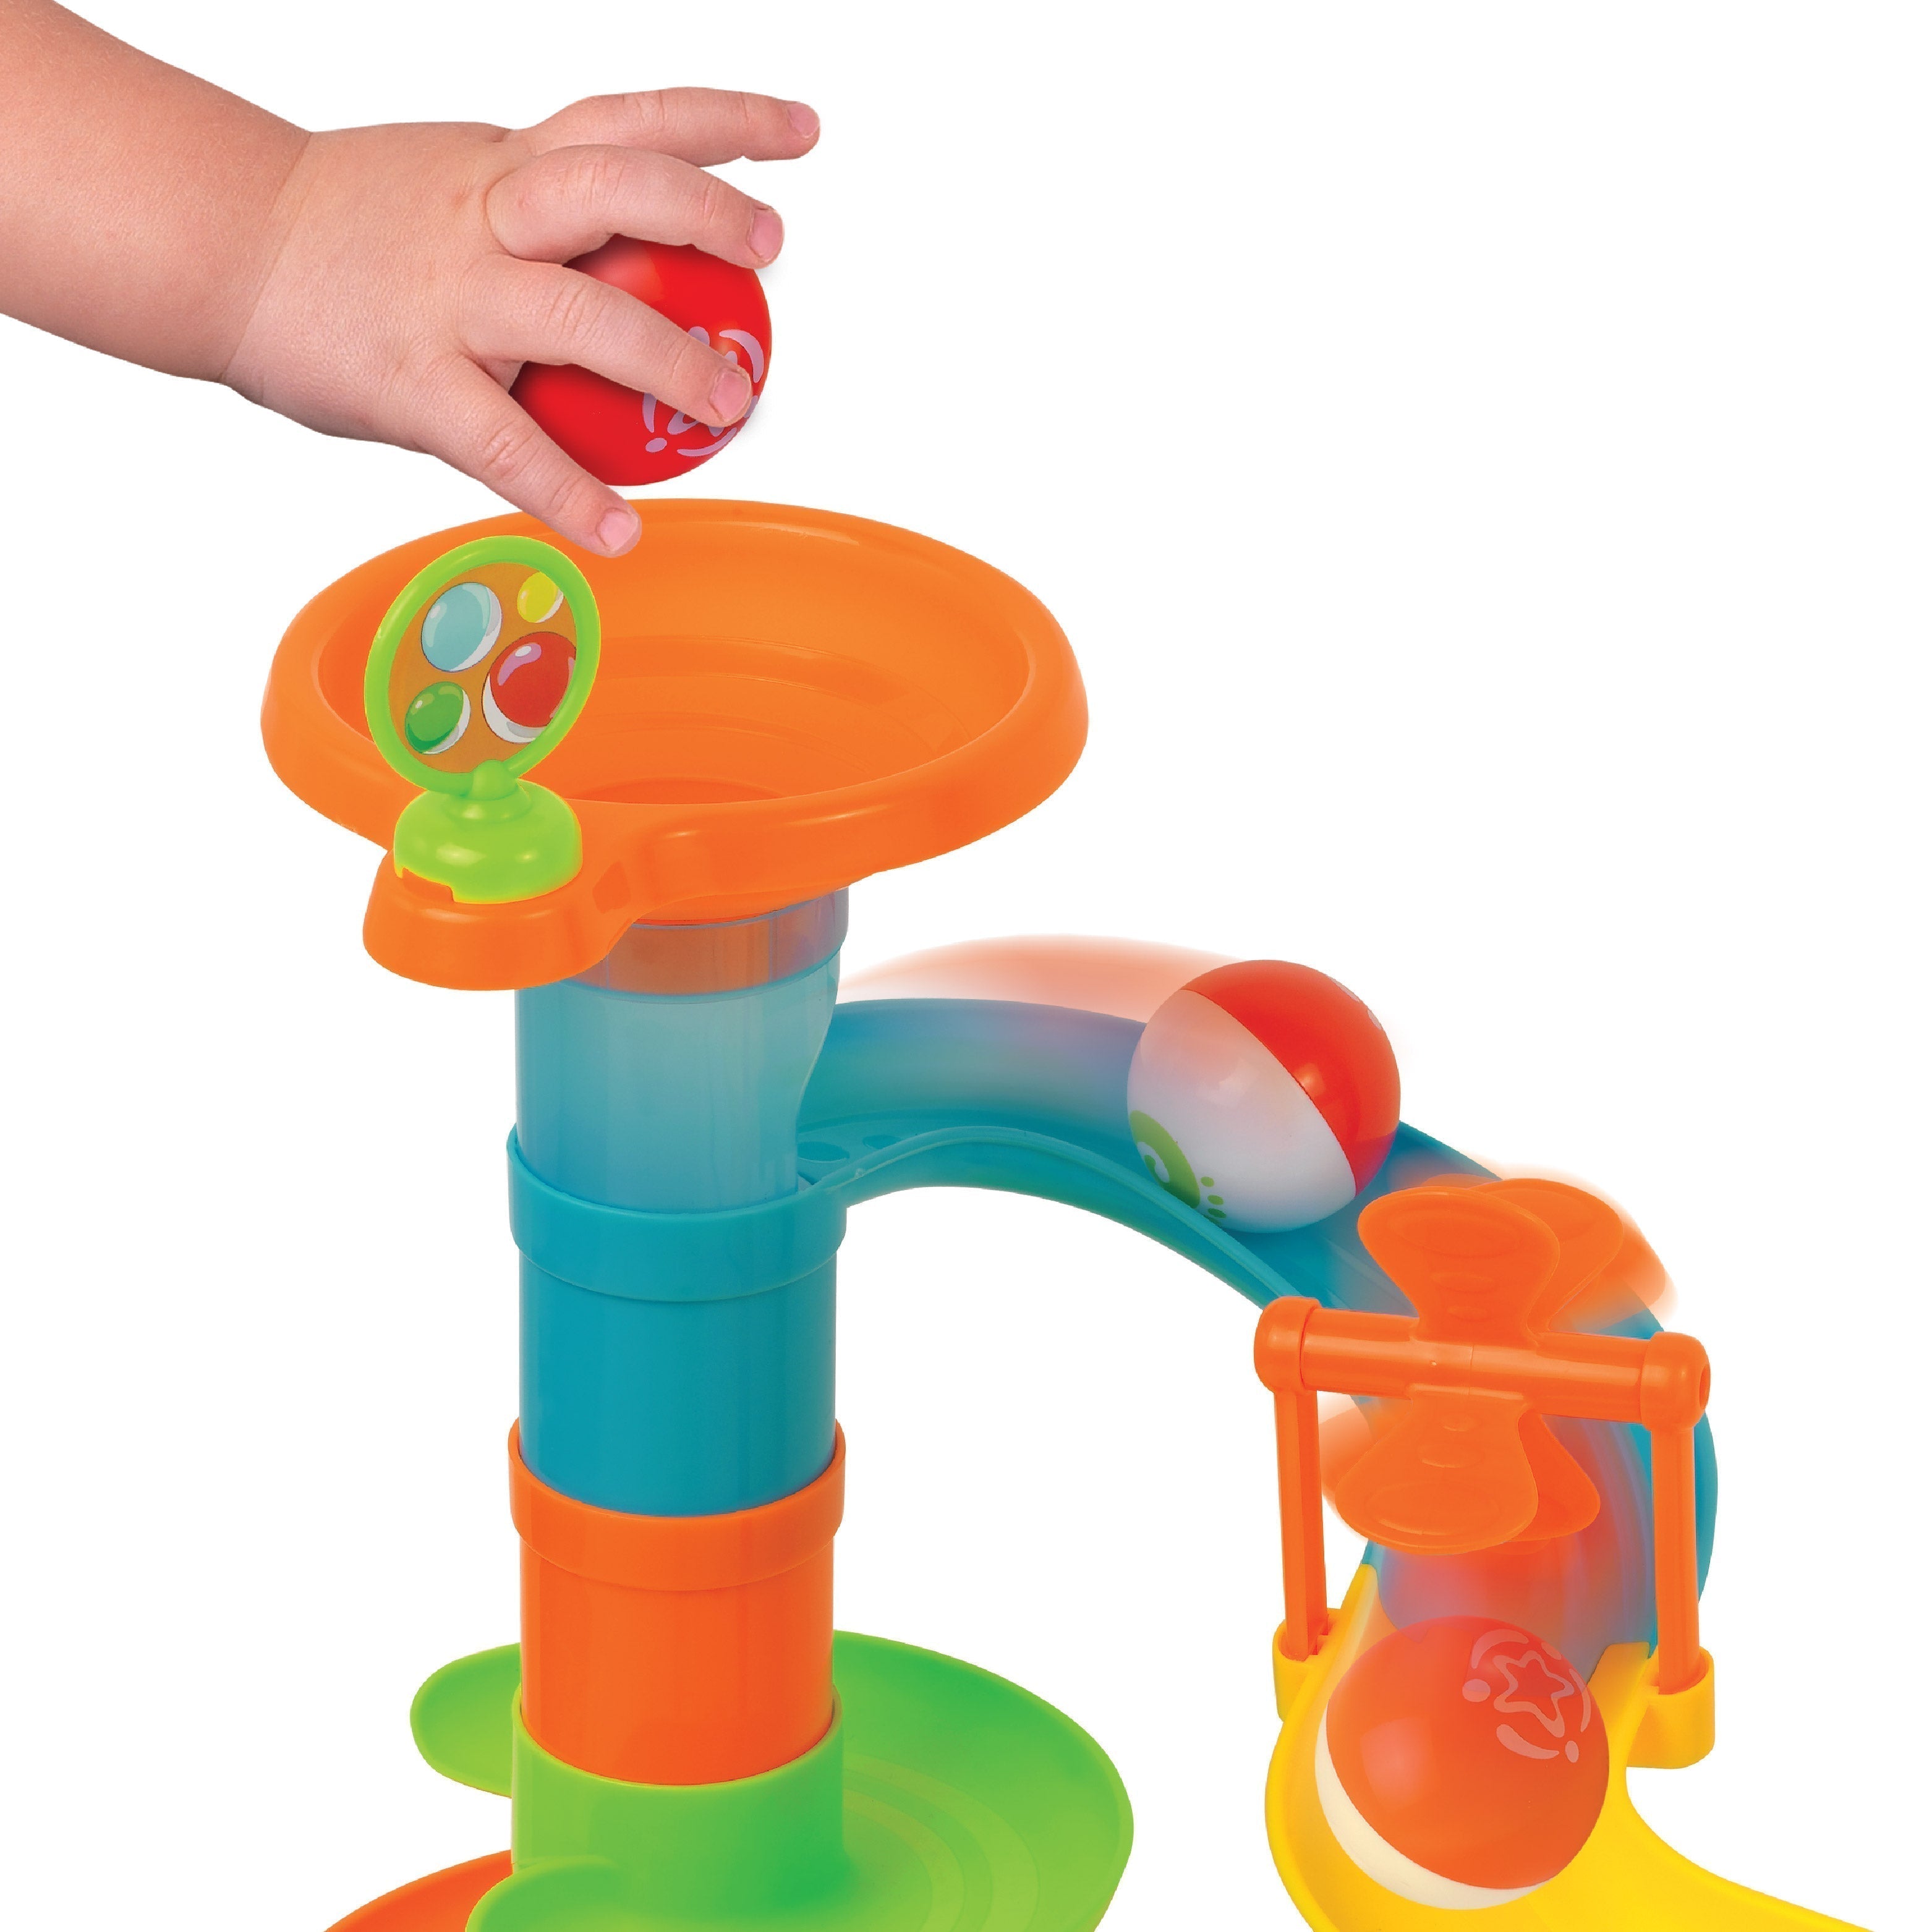 Edushape Bounce A Marble Racetrack, Edushape's Bounce A Marble Racetrack provides hours of visually stimulating fun rolling the balls through the track. Simple stacking set builds coordination, reasoning and fine motor skills with a surprise. Pieces are perfectly sized for smaller hands and slow-rolling balls keep young children fascinated. Track pieces are brightly colored for color matching. Includes pieces that bounce the balls on their way through the track! Set includes 30 pieces. For ages 12 months an